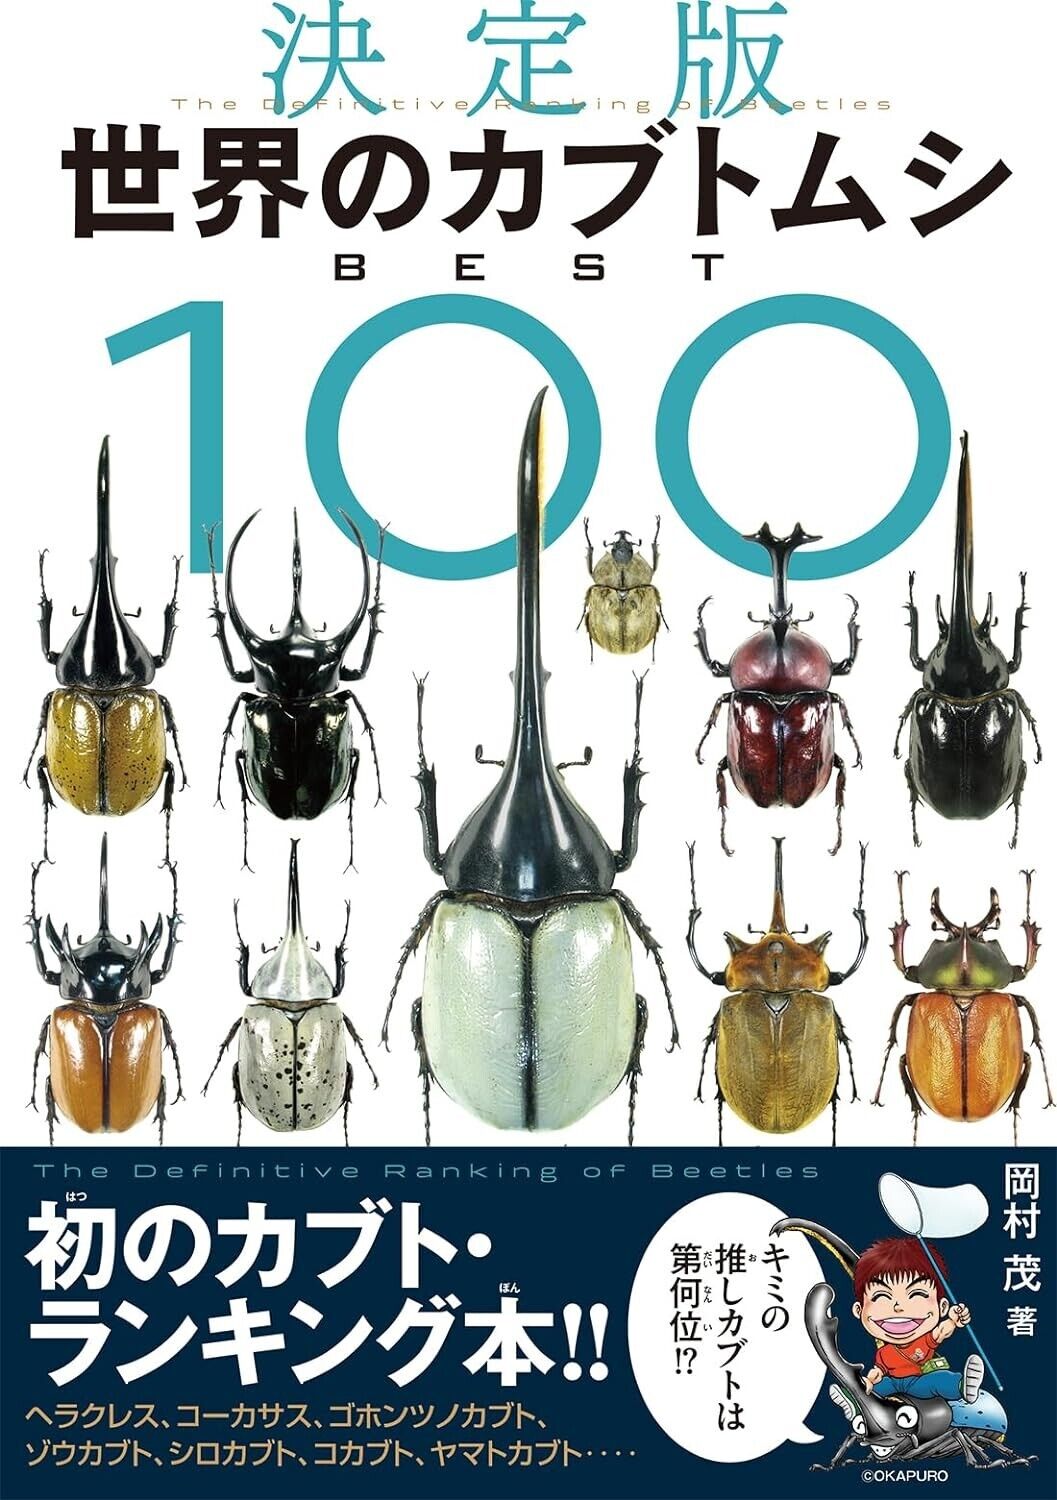 The Definitive Ranking of Beetles The BEST 100 by Shigeru Okamura Japanese Book